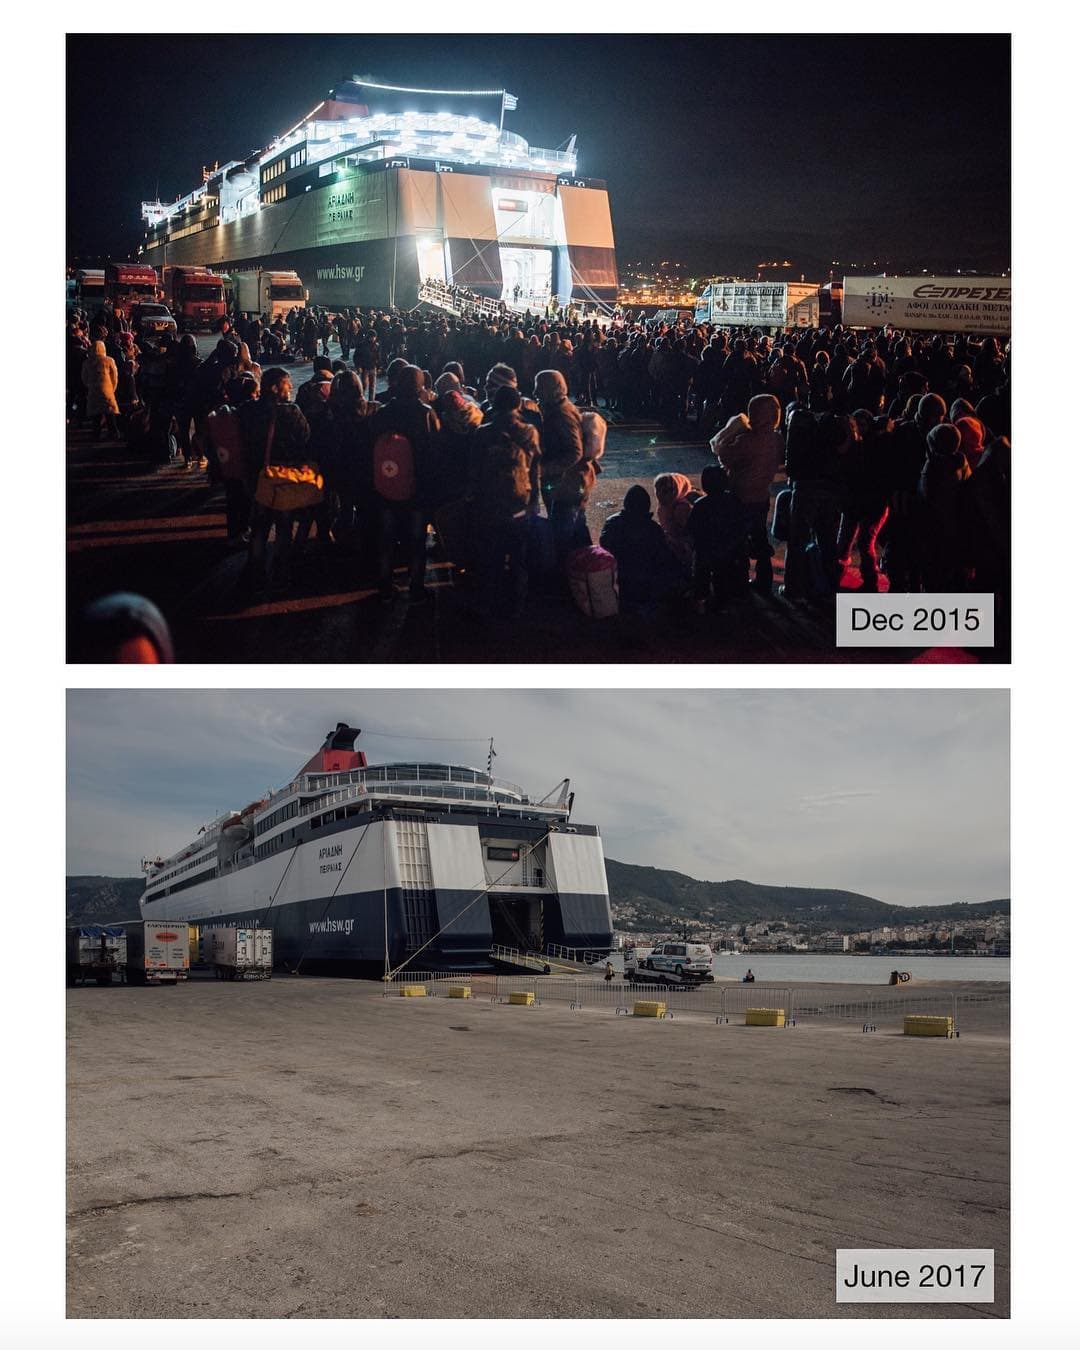 Fascinating before and after images of refugee crisis epicentre